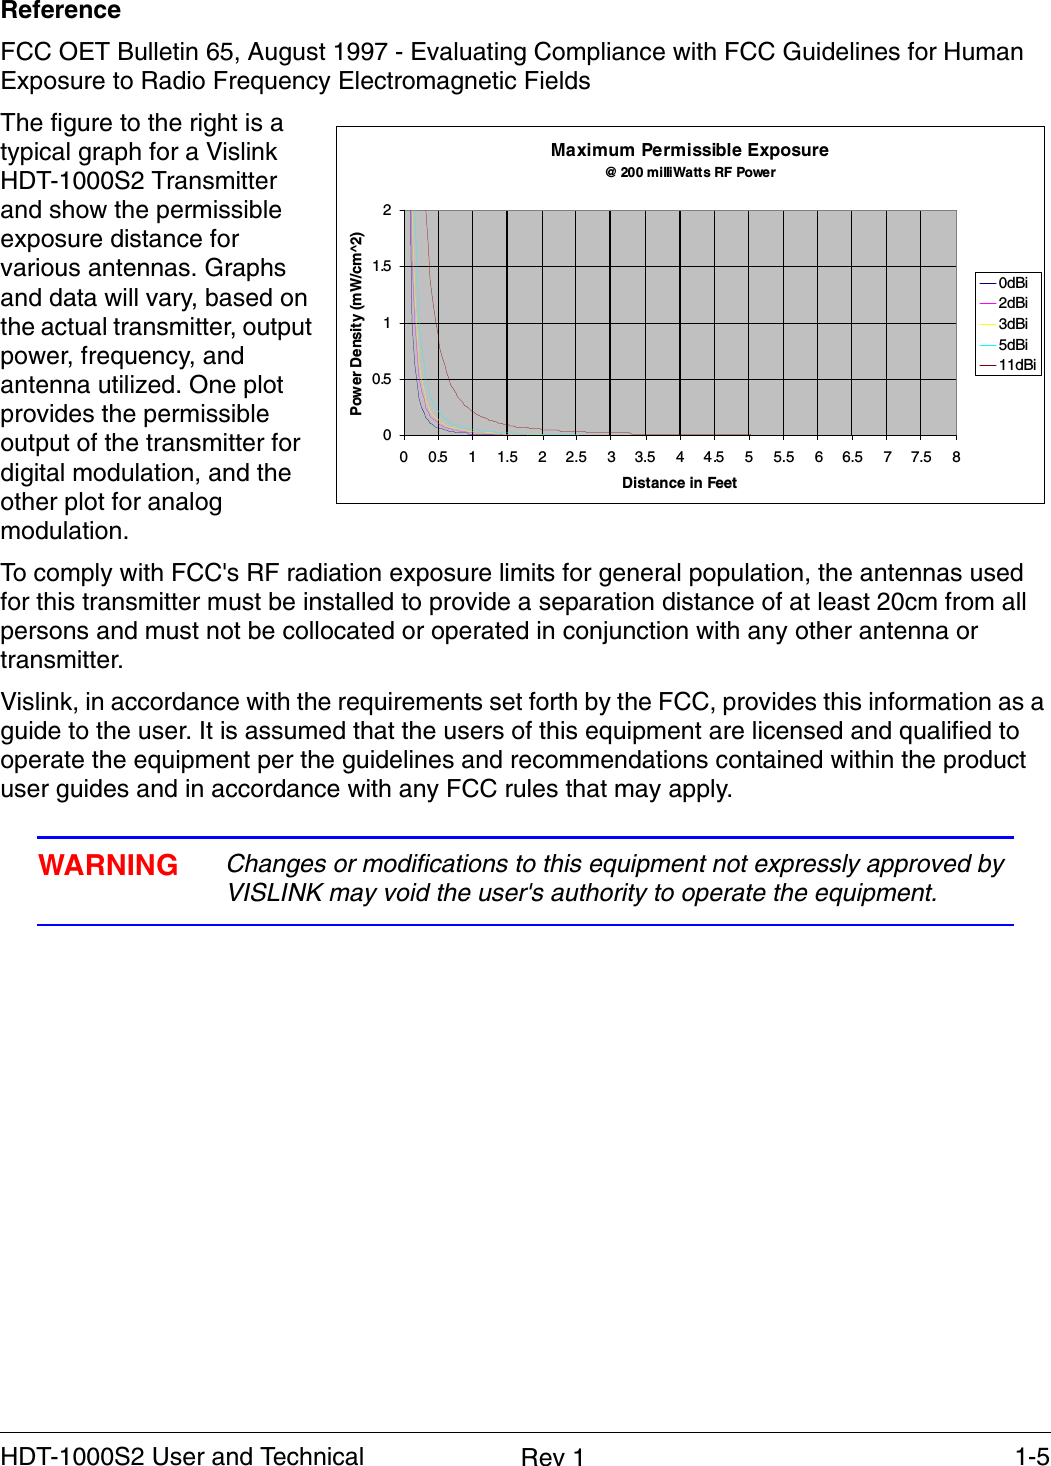    1-5HDT-1000S2 User and Technical  Rev 1ReferenceFCC OET Bulletin 65, August 1997 - Evaluating Compliance with FCC Guidelines for Human Exposure to Radio Frequency Electromagnetic FieldsThe figure to the right is a typical graph for a Vislink HDT-1000S2 Transmitter and show the permissible exposure distance for various antennas. Graphs and data will vary, based on the actual transmitter, output power, frequency, and antenna utilized. One plot provides the permissible output of the transmitter for digital modulation, and the other plot for analog modulation. To comply with FCC&apos;s RF radiation exposure limits for general population, the antennas used for this transmitter must be installed to provide a separation distance of at least 20cm from all persons and must not be collocated or operated in conjunction with any other antenna or transmitter.Vislink, in accordance with the requirements set forth by the FCC, provides this information as a guide to the user. It is assumed that the users of this equipment are licensed and qualified to operate the equipment per the guidelines and recommendations contained within the product user guides and in accordance with any FCC rules that may apply. WARNING Changes or modifications to this equipment not expressly approved by VISLINK may void the user&apos;s authority to operate the equipment.   Maximum Permissible Exposure@ 200 milliWatts RF Power00.511.5200.511.522.533.544.555.566.5 77.58Distance in FeetPower Density (mW/cm^2)0dBi2dBi3dBi5dBi11dBi